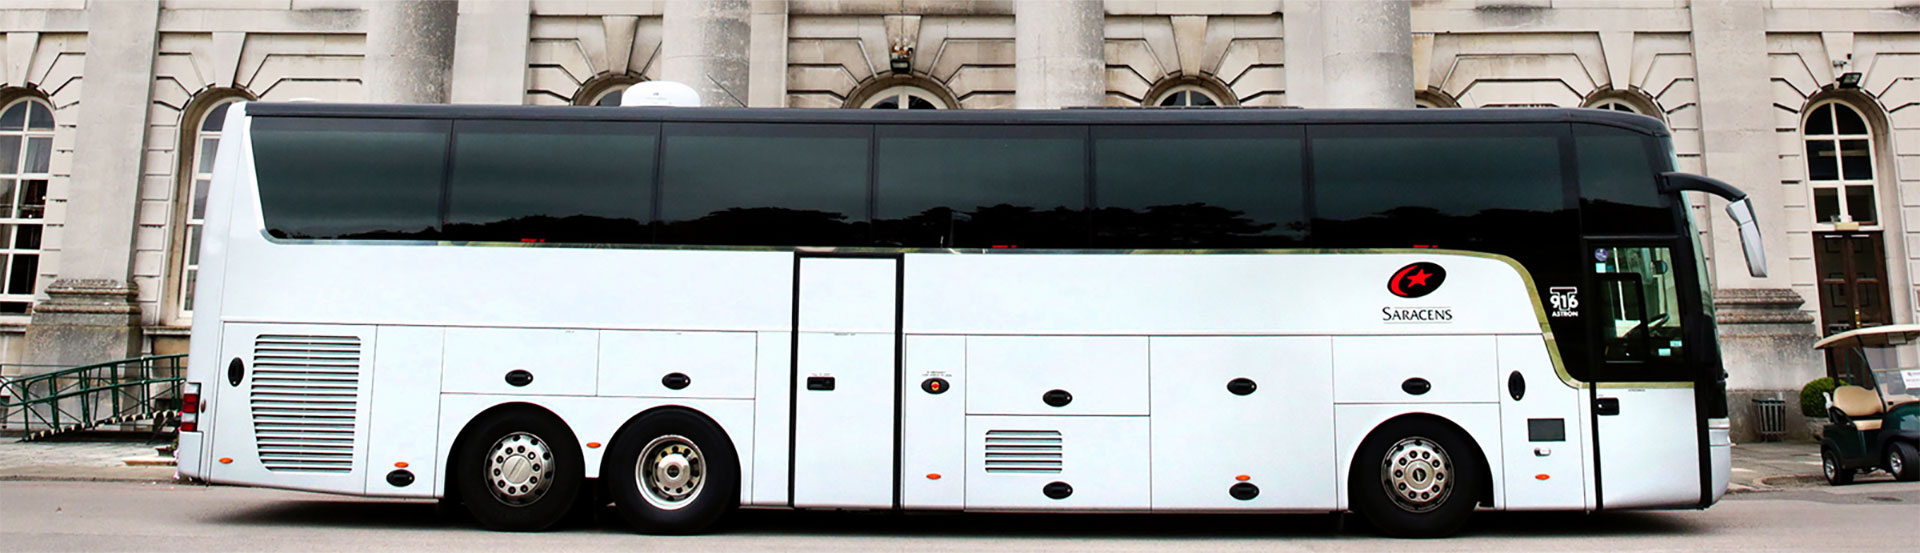 Executive Coach Hire | Operating Throughout London and Hertfordshire